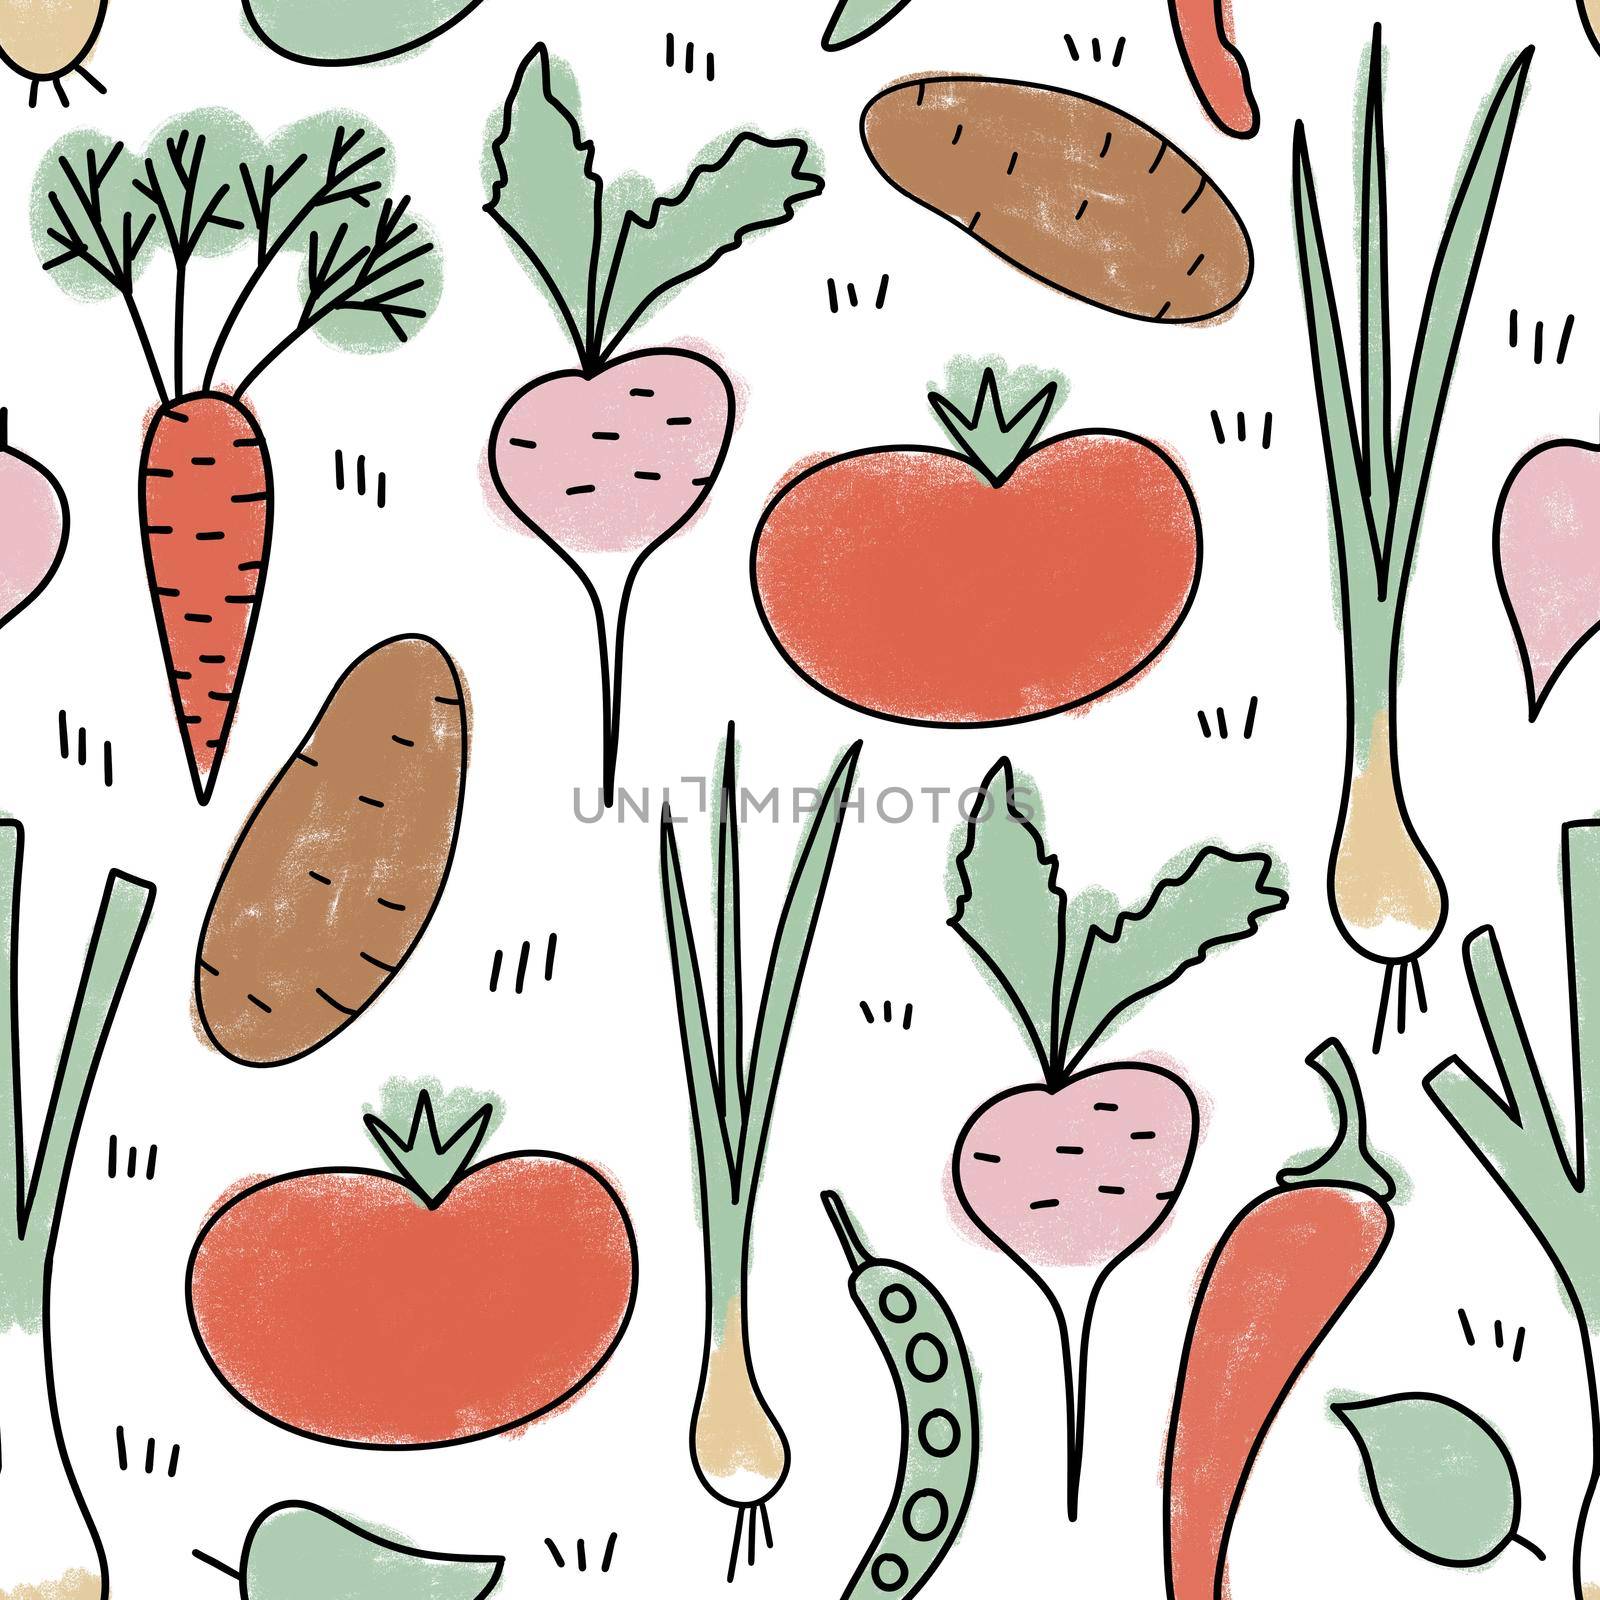 Hand drawn seamless pattern with vegetables veggies vegan vegetarian design. Tomato potato carrot cabbage leek onion bell papper fabric print. Retro vintage kitchen textile background, healthy food concept. by Lagmar